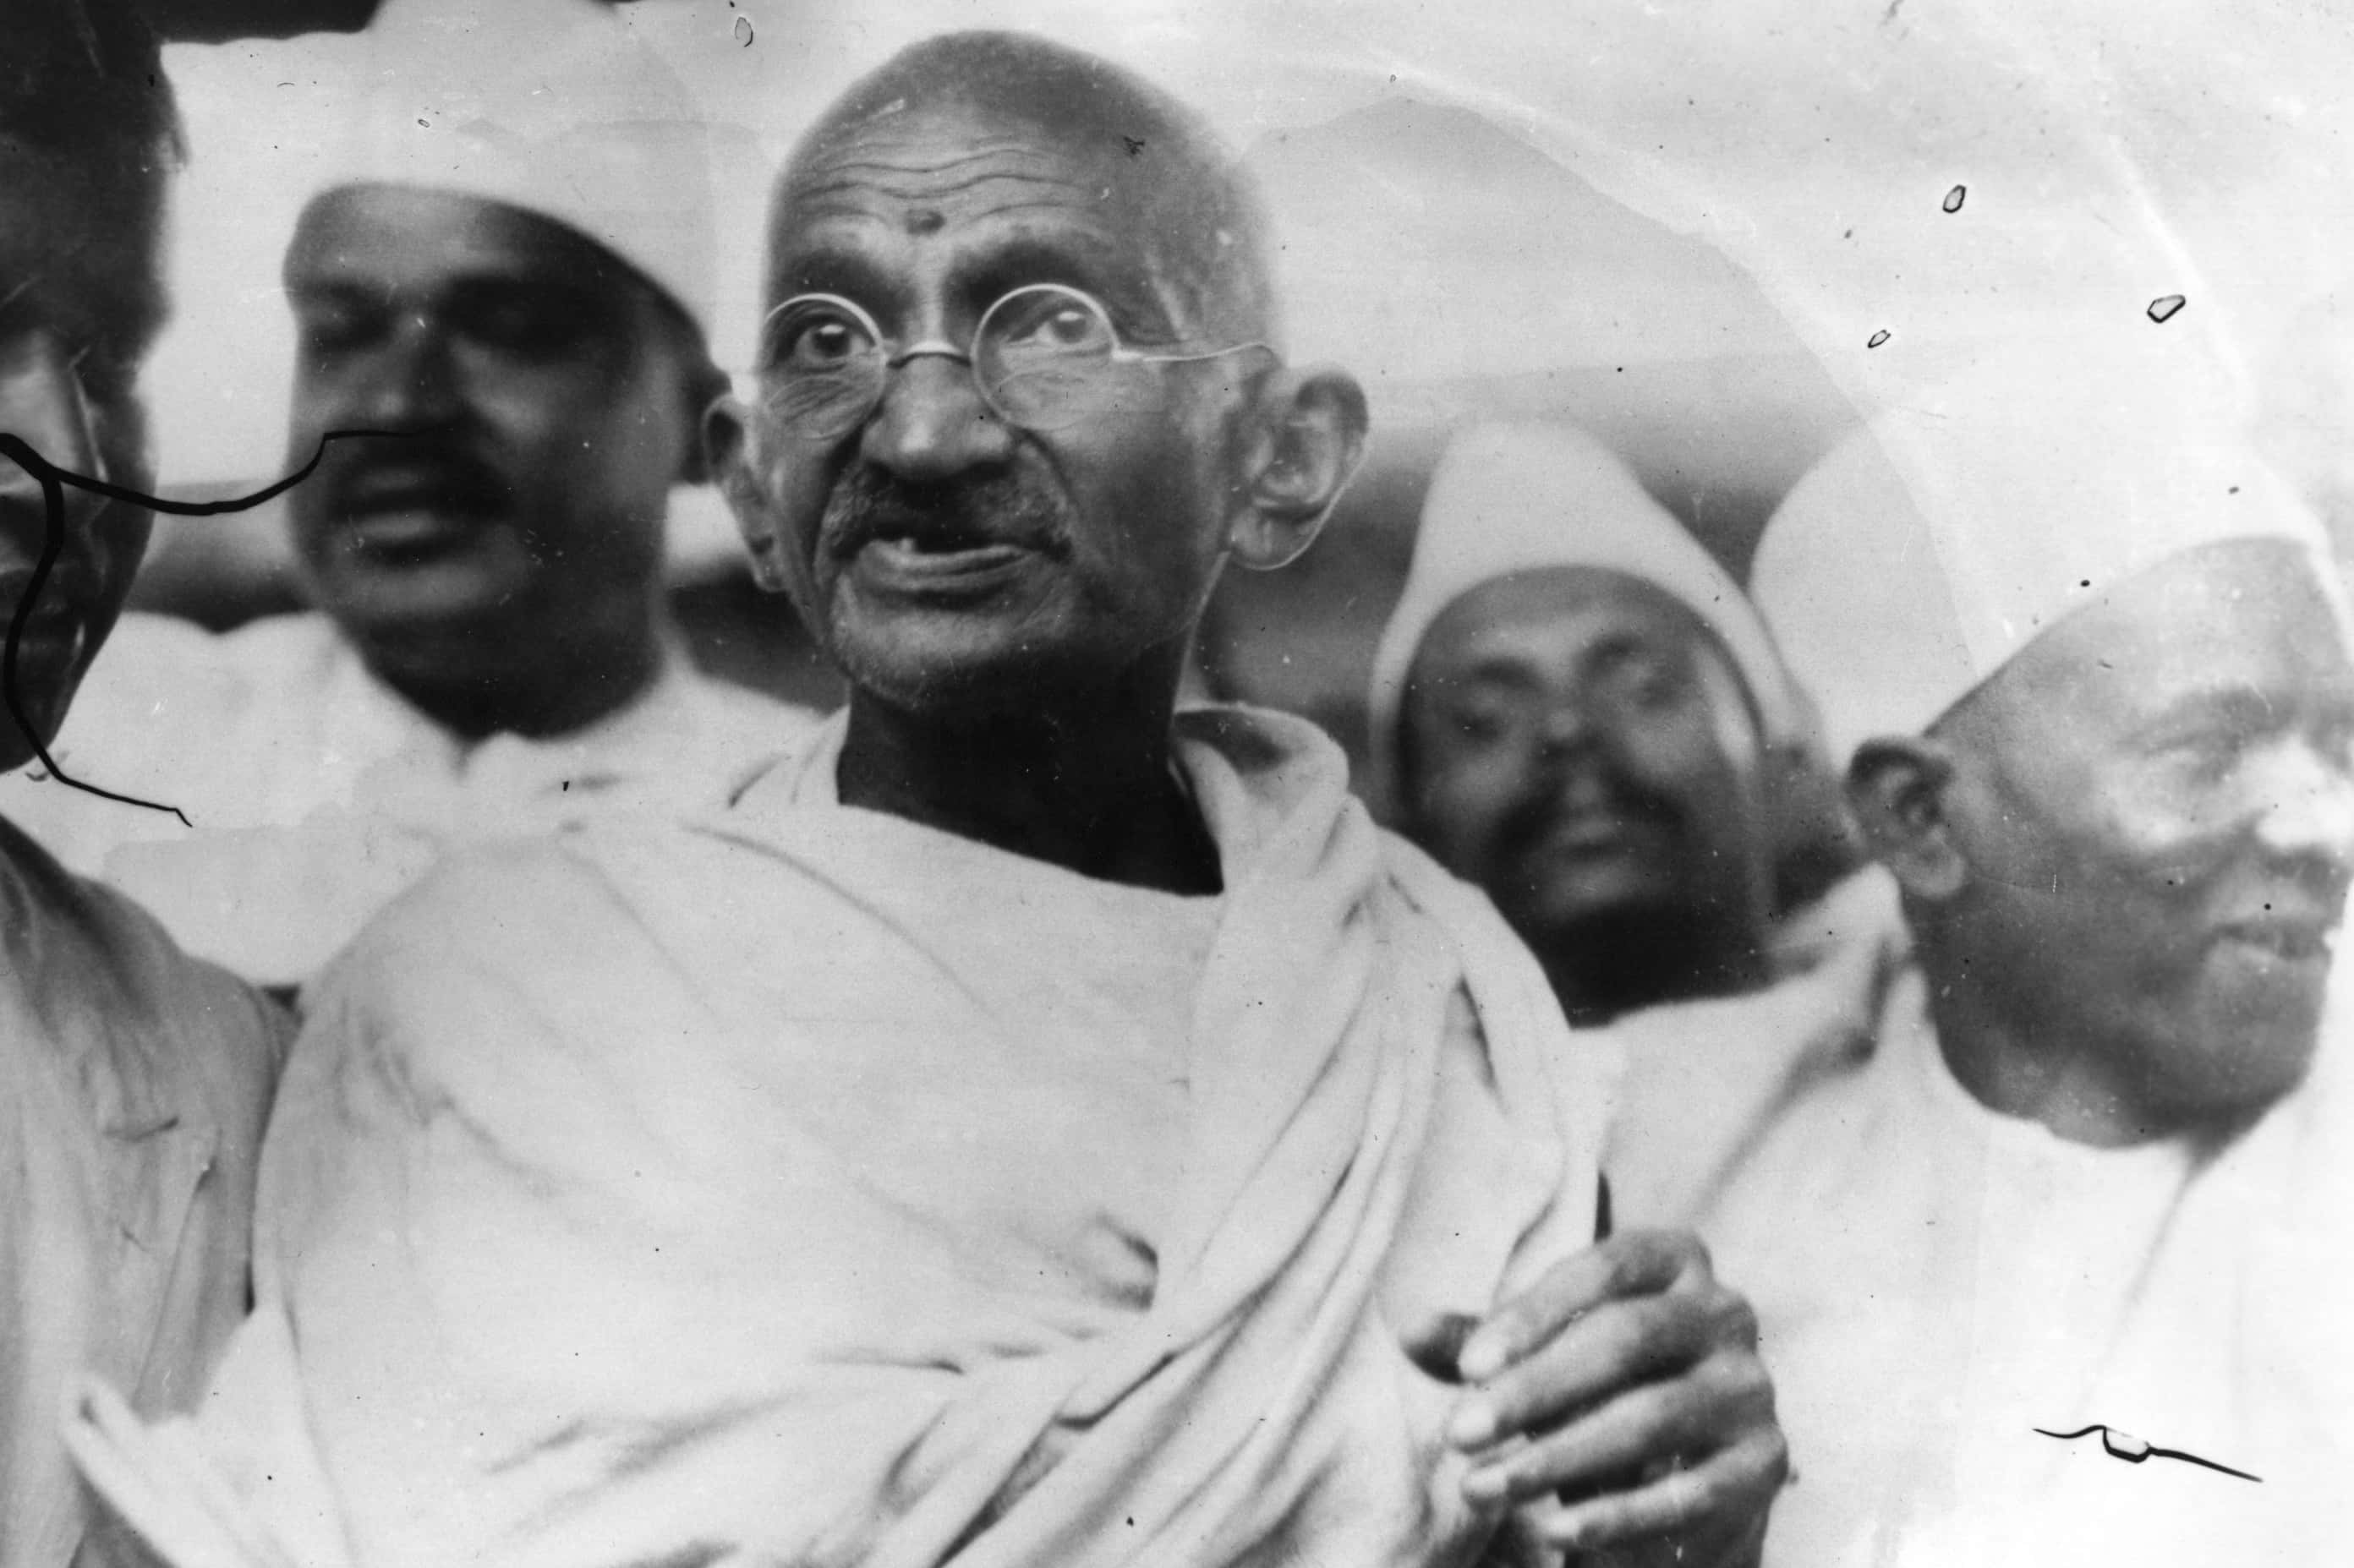 The life and teachings of Mahatma Gandhi have inspired millions of people worldwide.